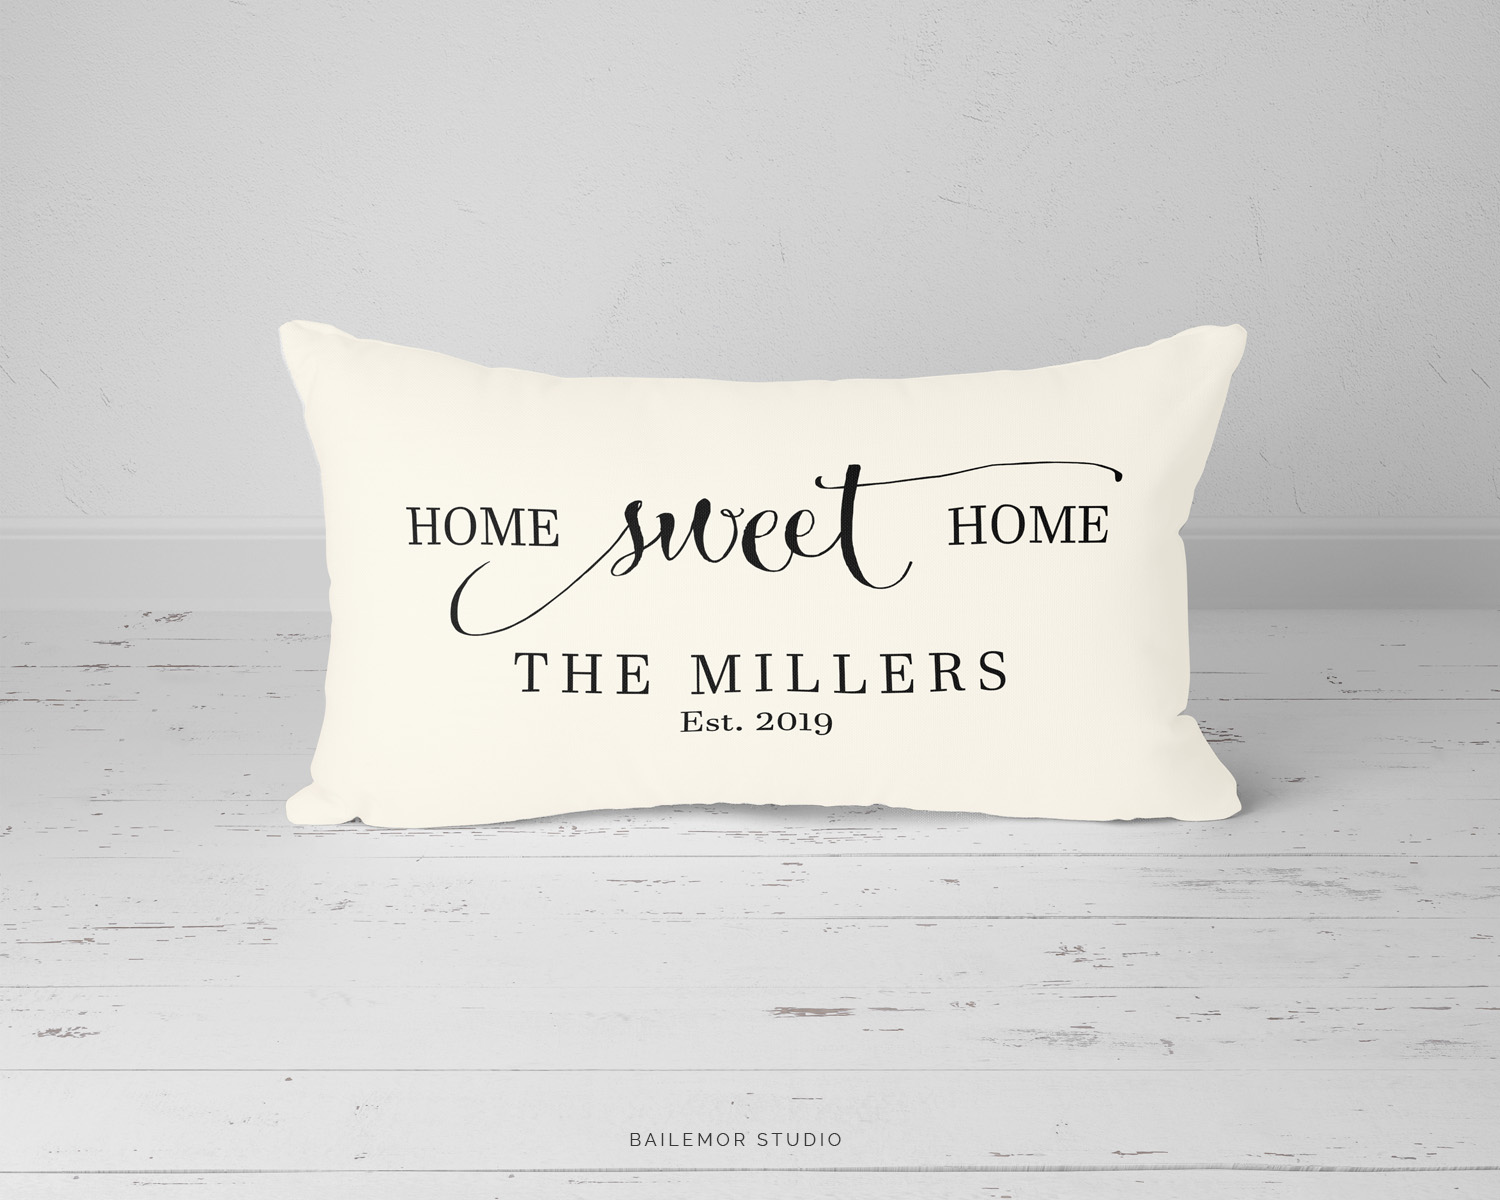 Home Sweet Home 2 Home Sweet Home pillow christmas gift word pillow throw pillow phrase pillow